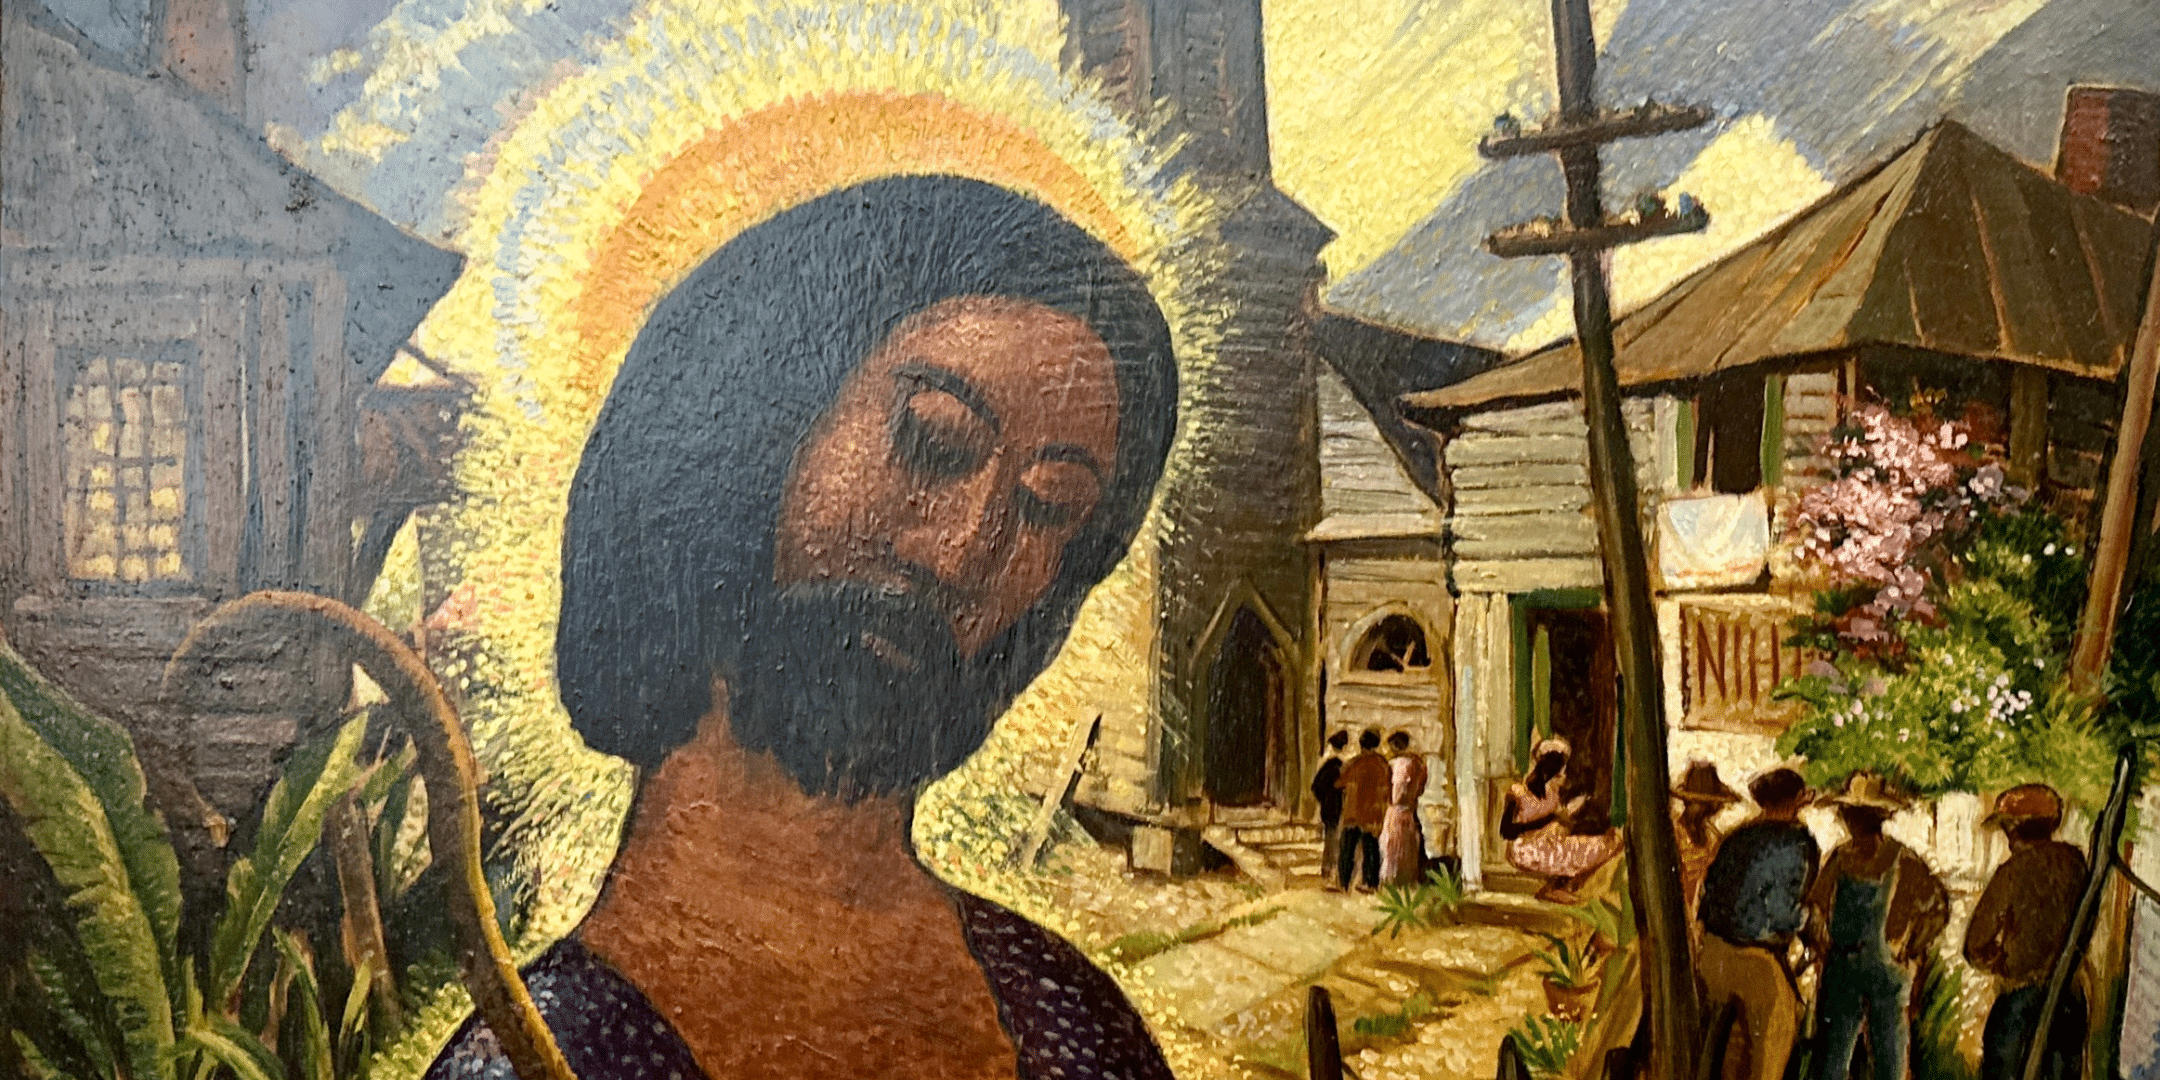 Painting by J. Andre Smith, Portrayal of Jesus in a small older town.